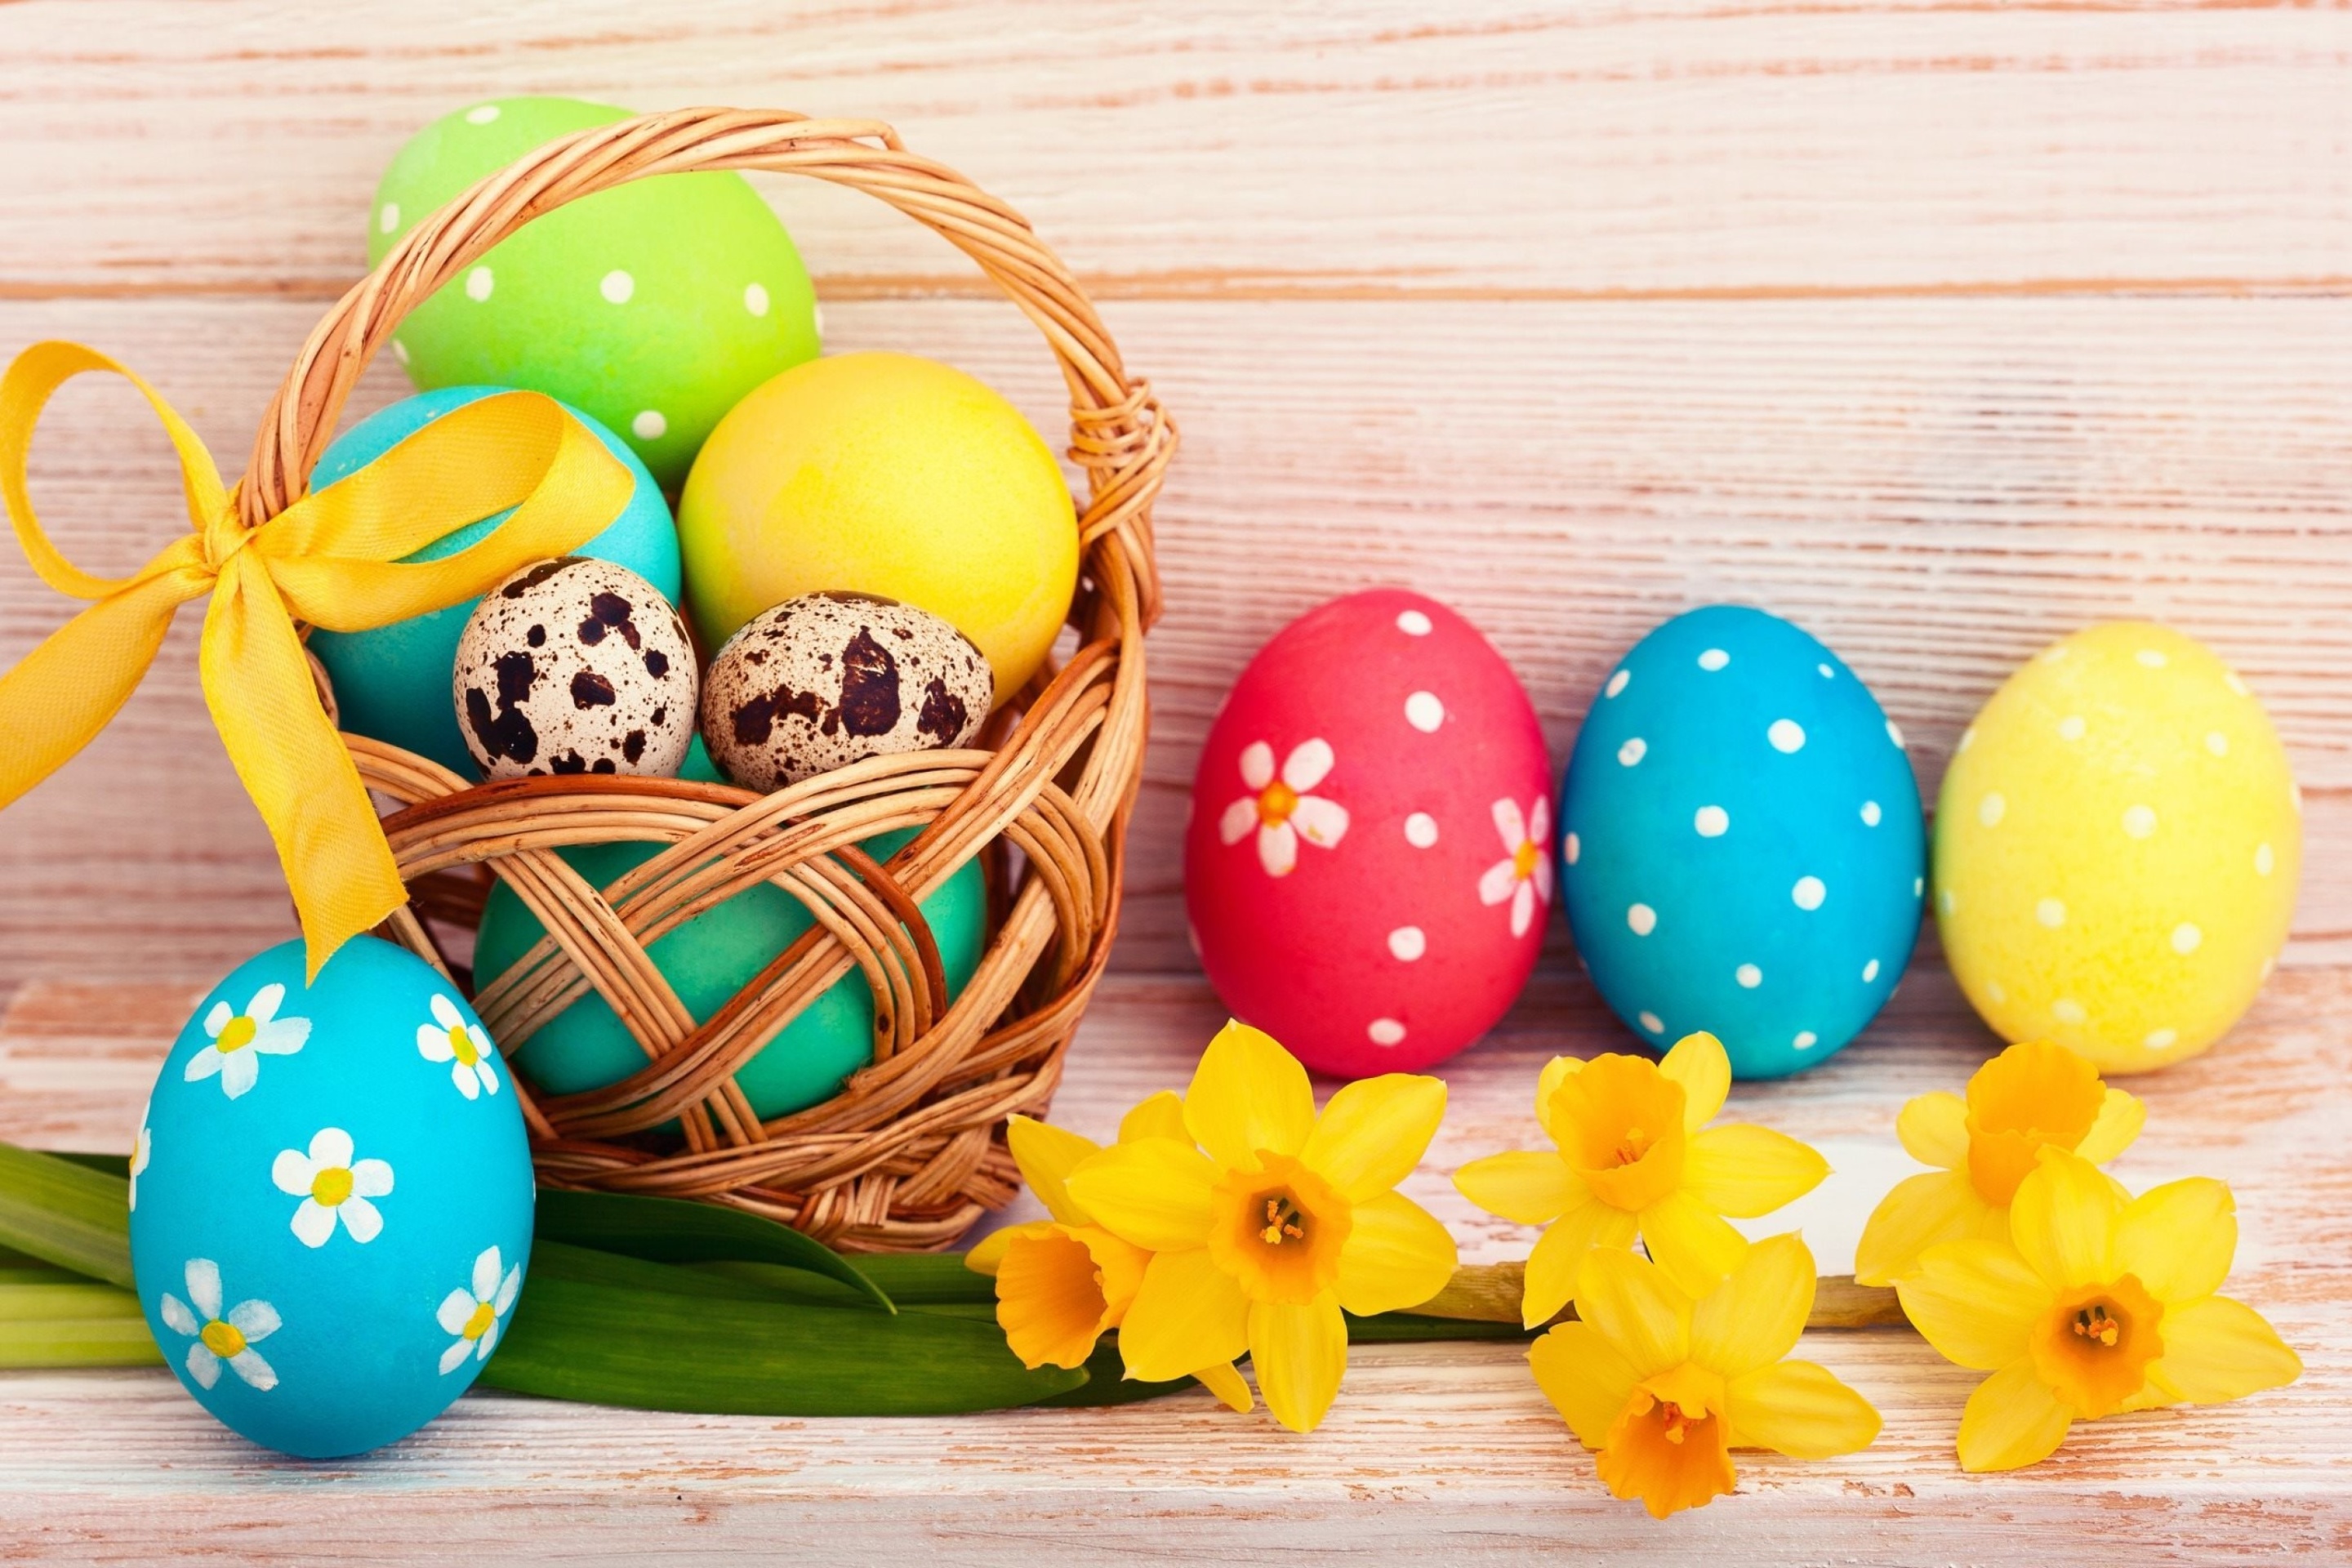 Easter Spring Daffodils Flowers and Eggs Decorations wallpaper 2880x1920